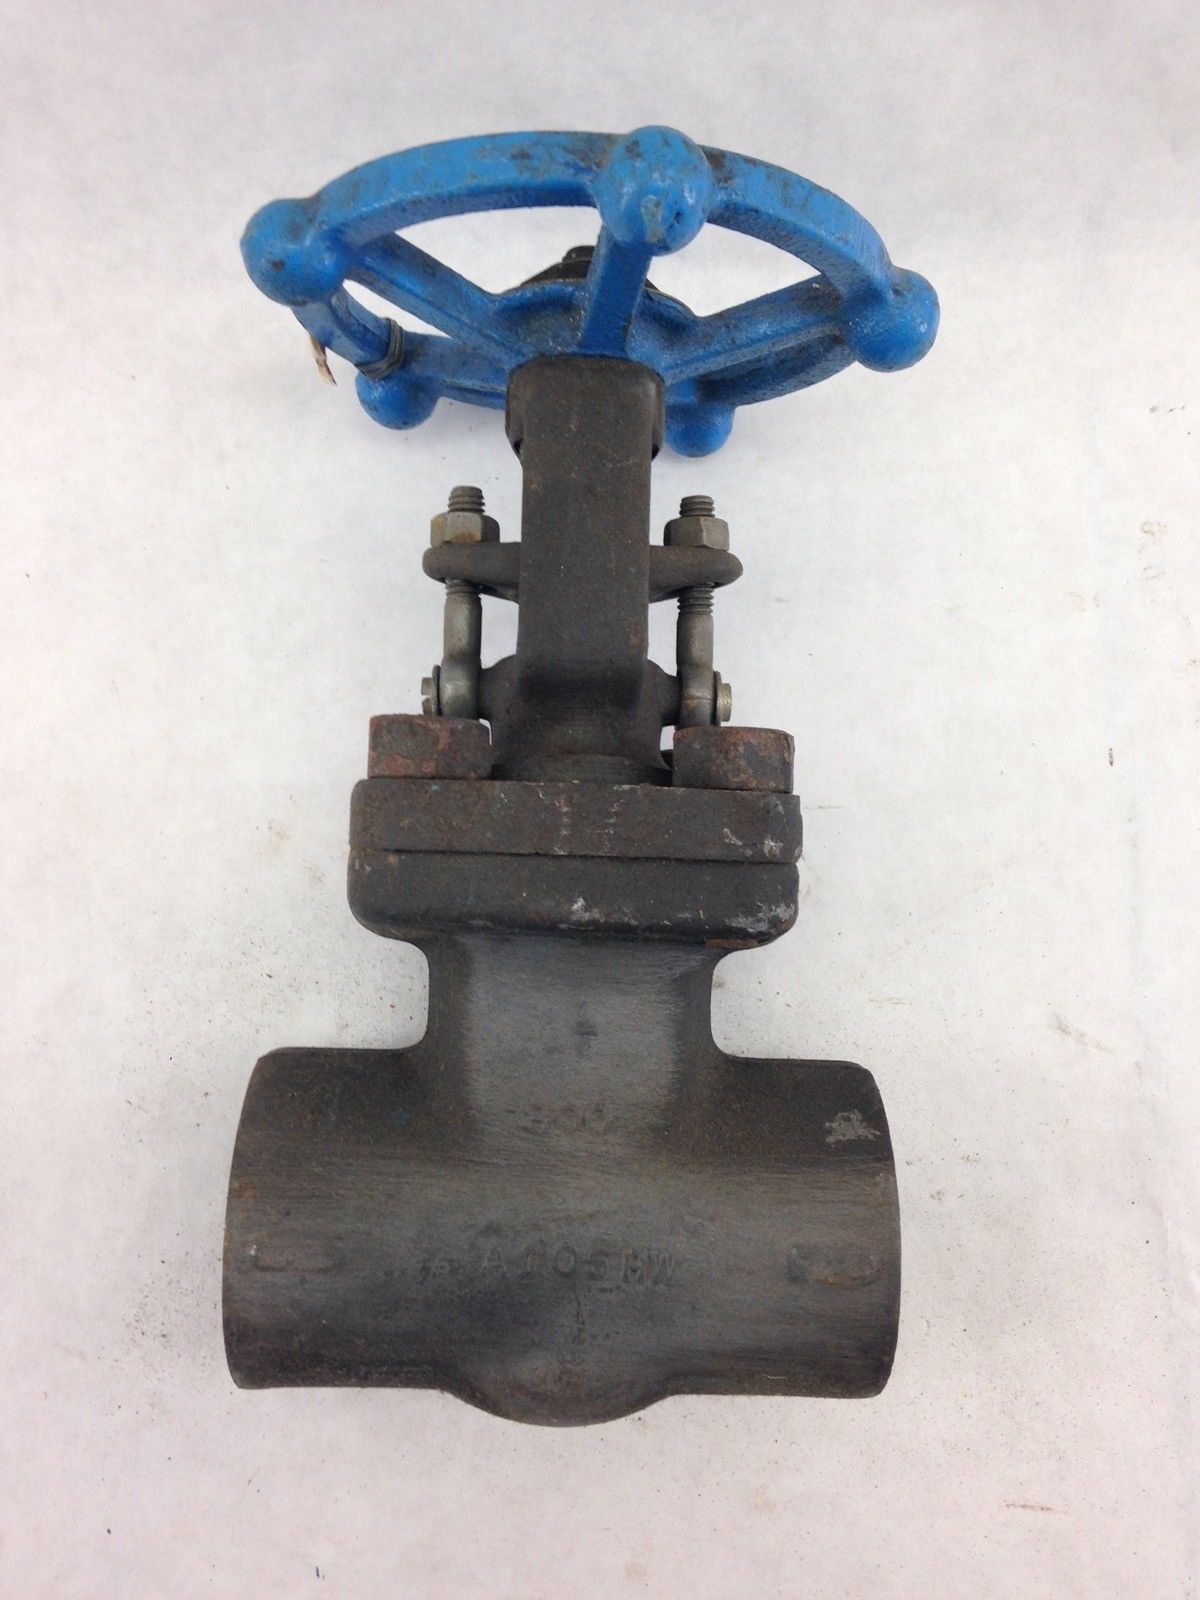 SMITH GATE VALVE A105HW 1-1/2″ FORGED STEEL (B446) 1